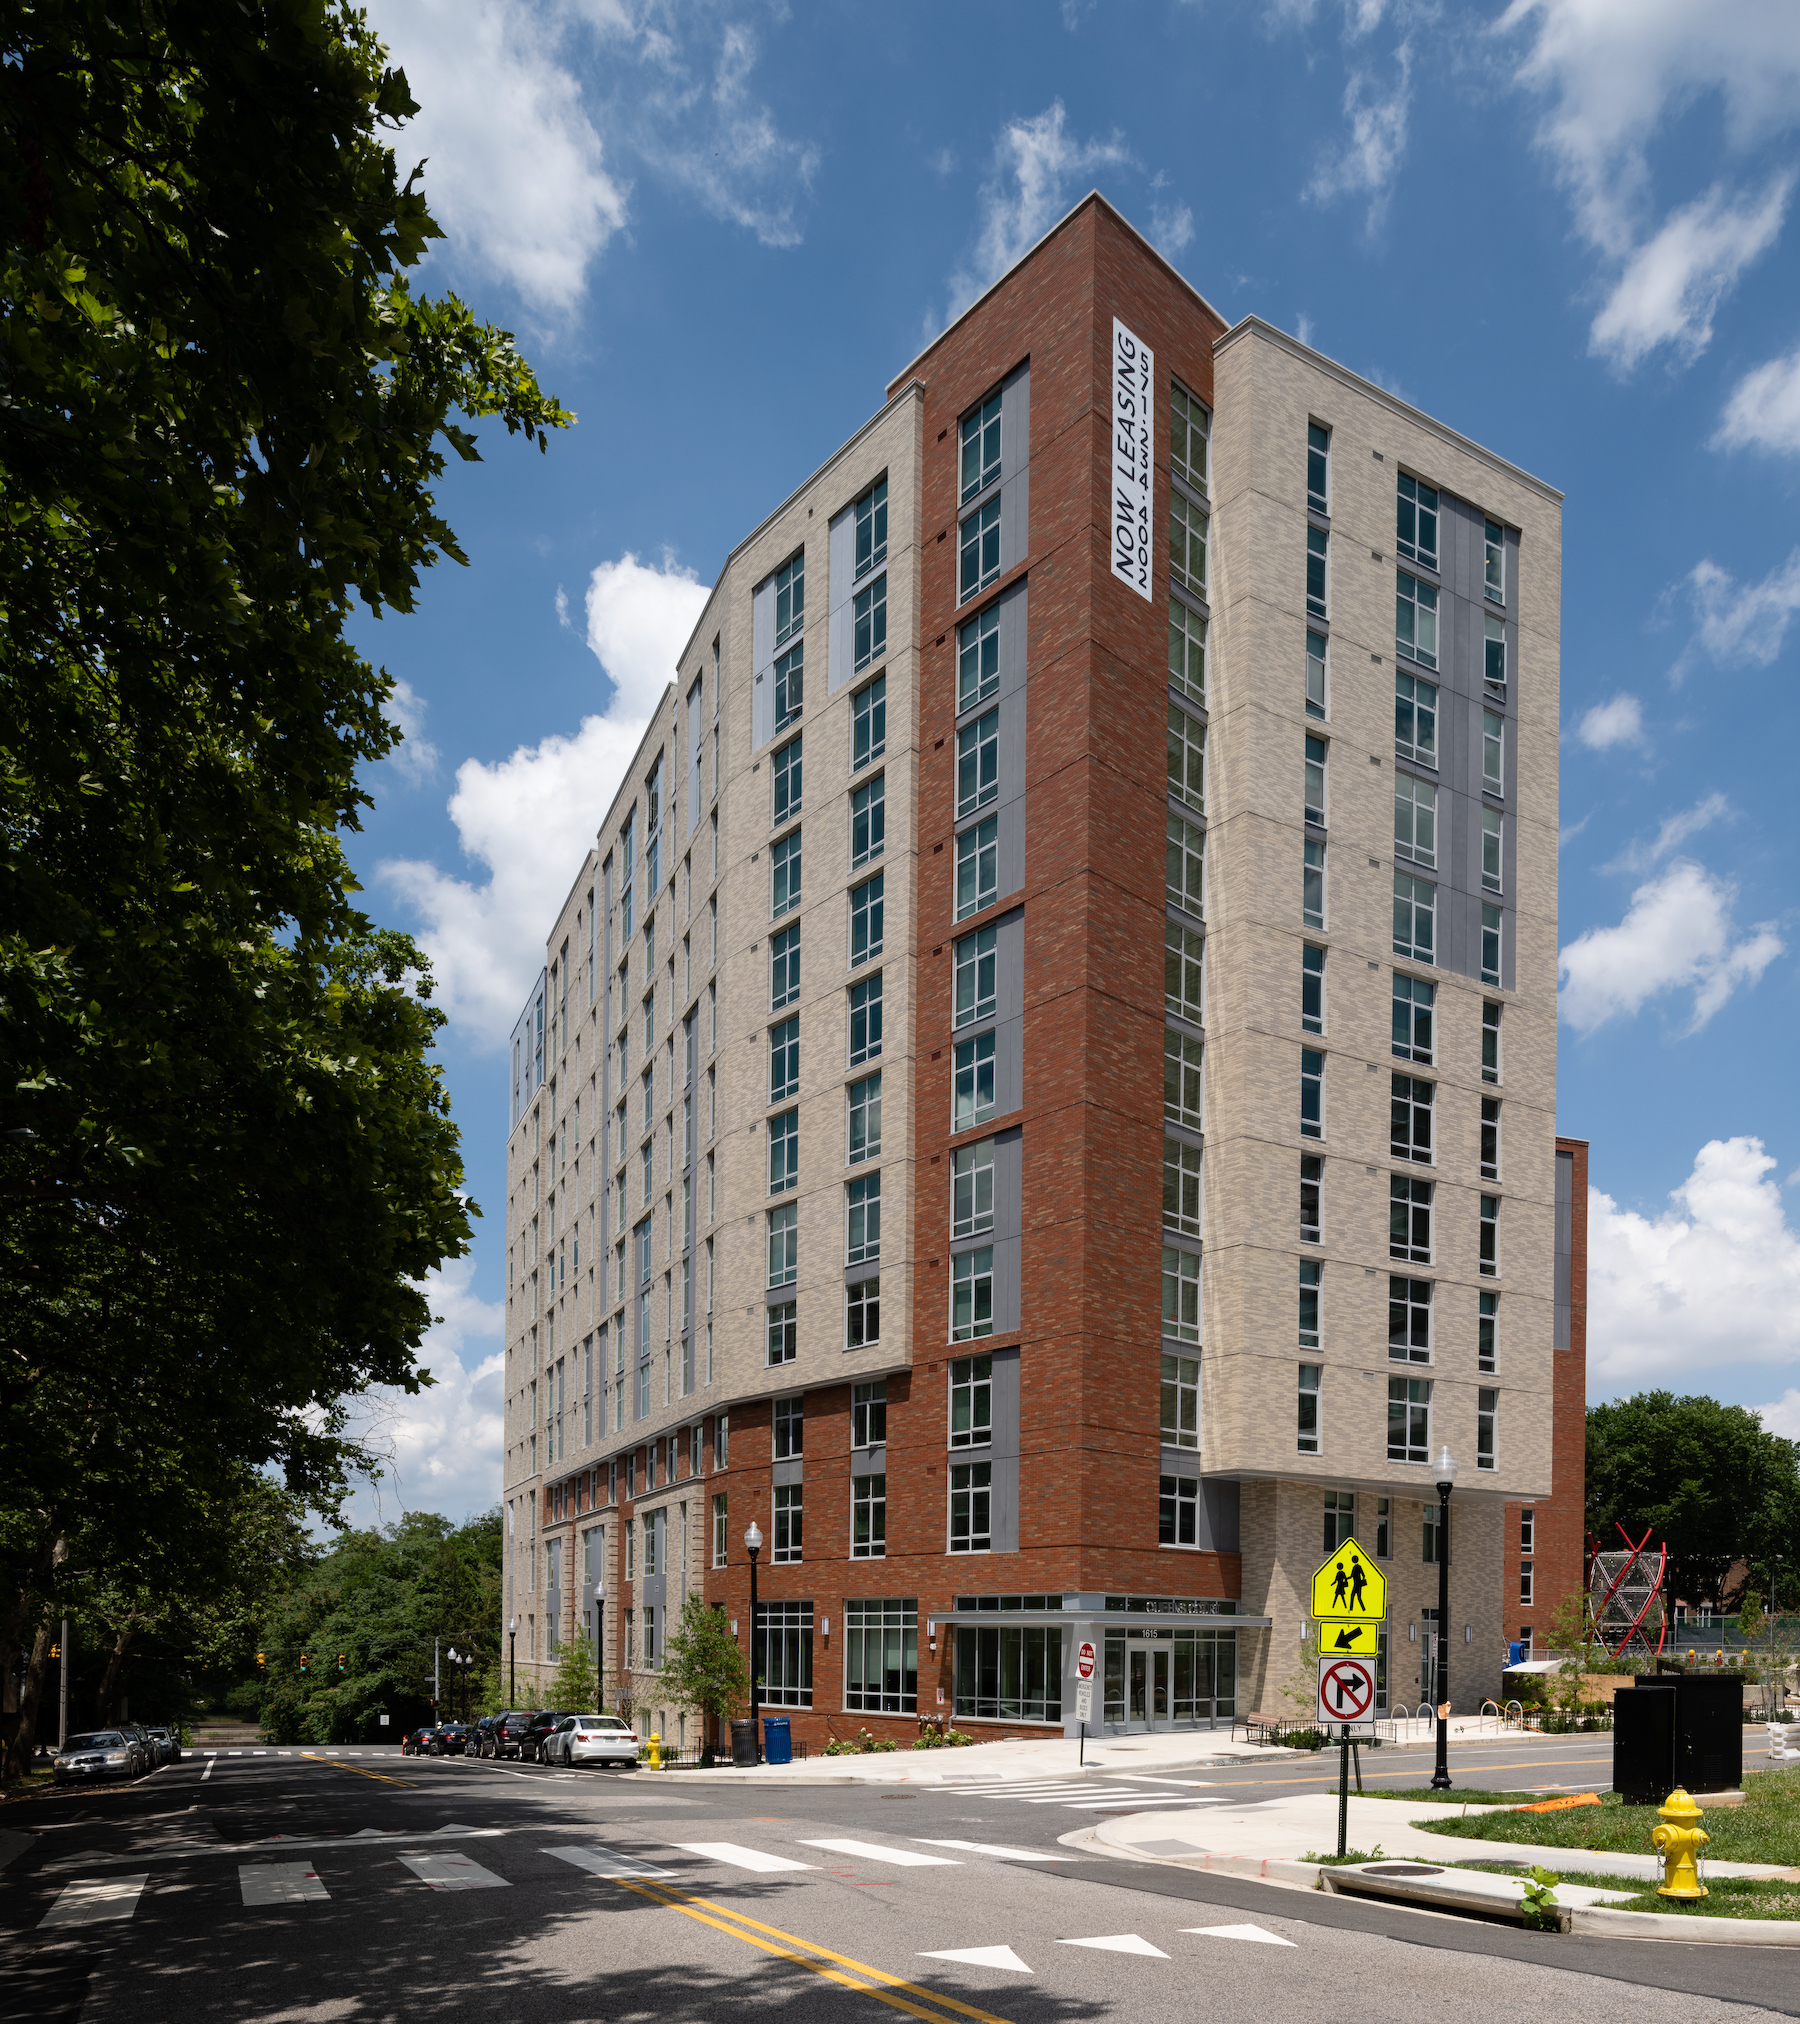 9 Queens Court Apartments, Arlington County, 9 noteworthy multifamily developments for 2022, John Cole.